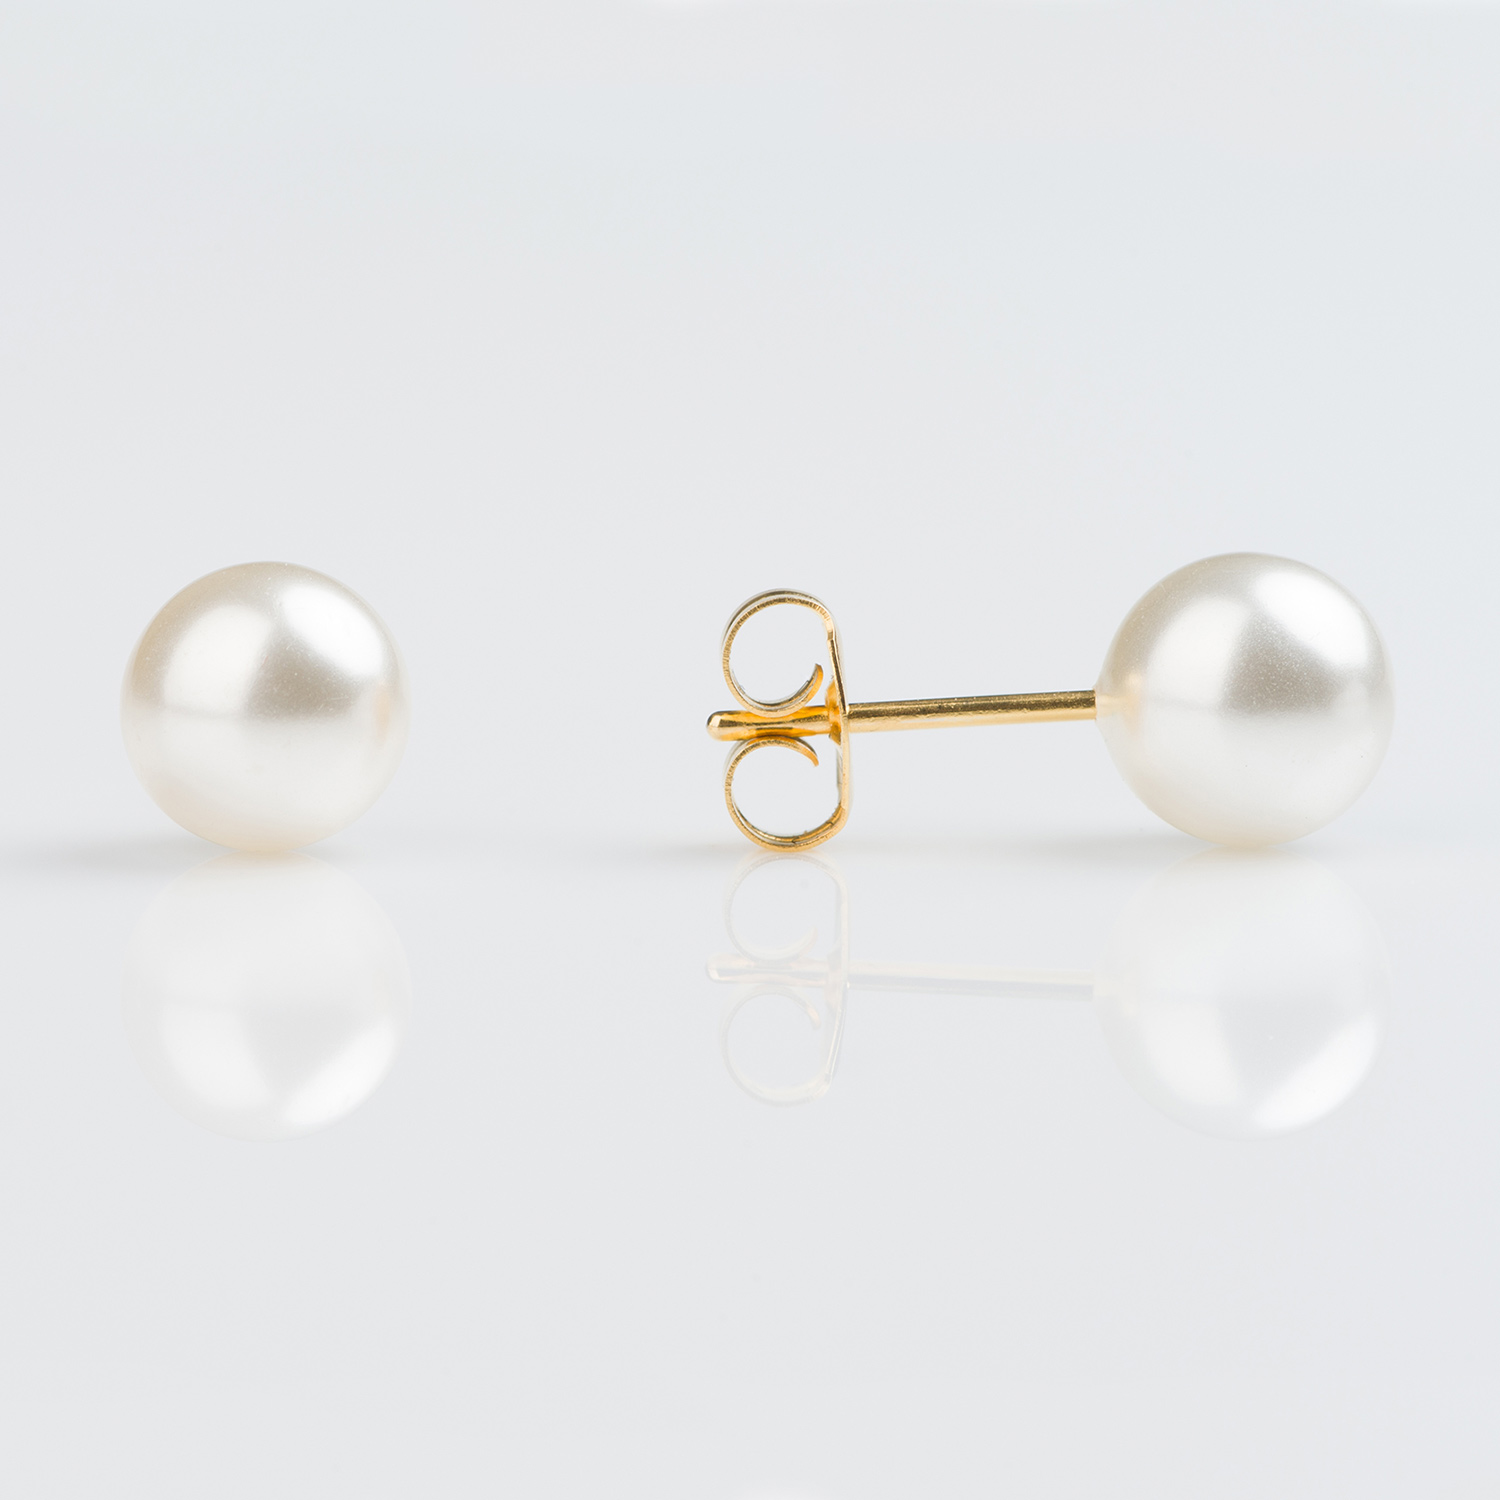 S677STX – Studex Sensitive Gold Plated 7mm White Pearl Stud